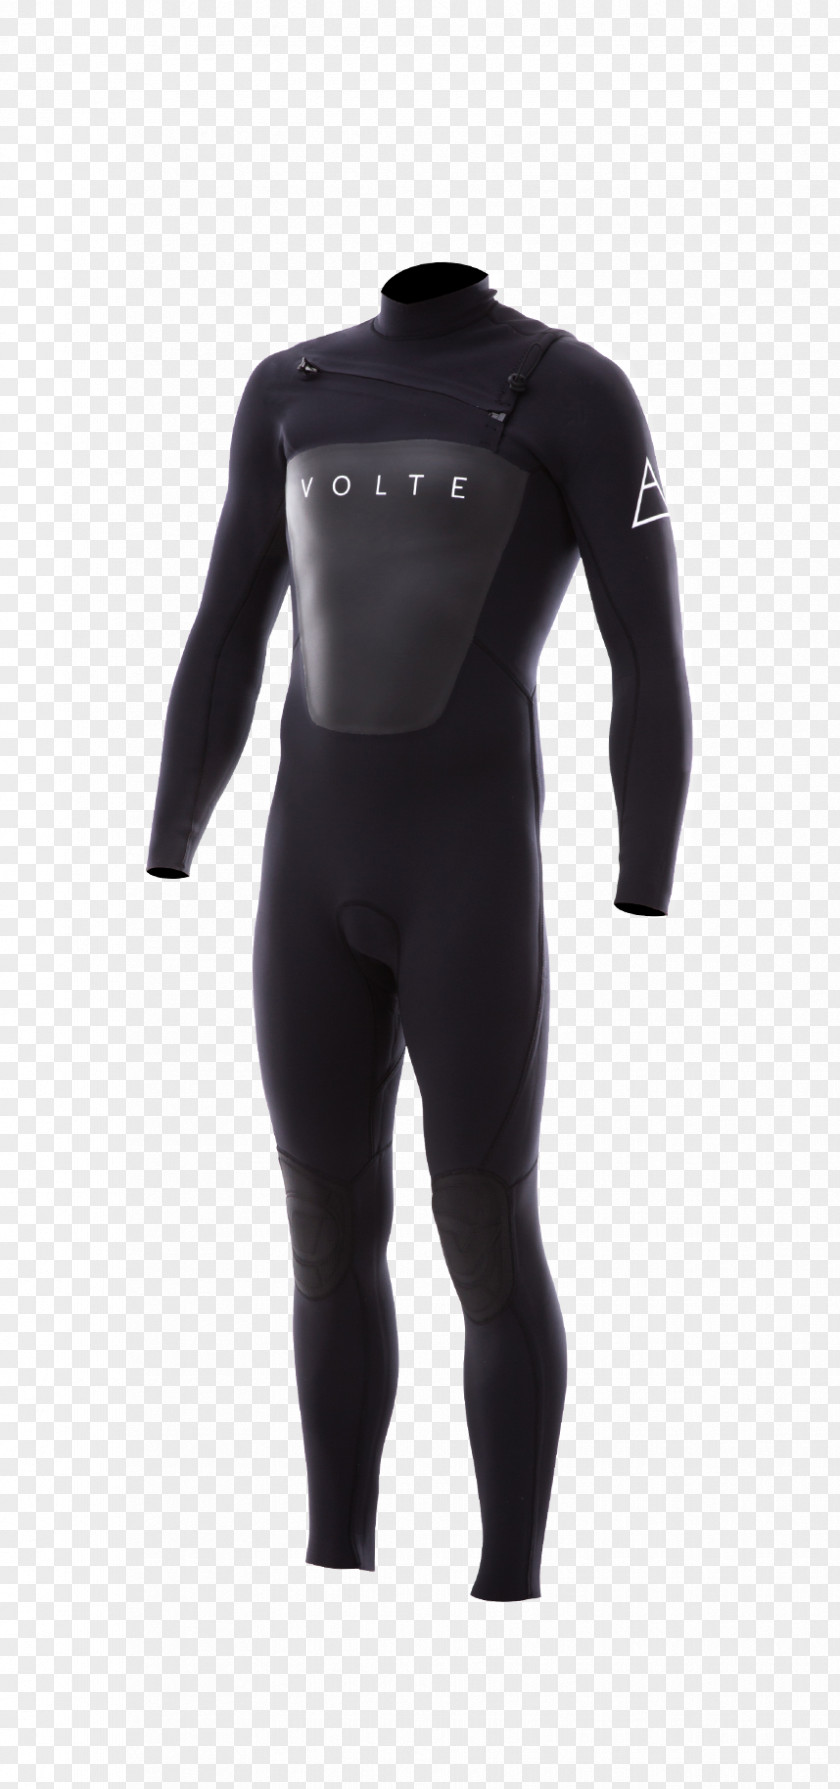 Surfer Suit Wetsuit Surfing T-shirt O'Neill Surfwear PNG